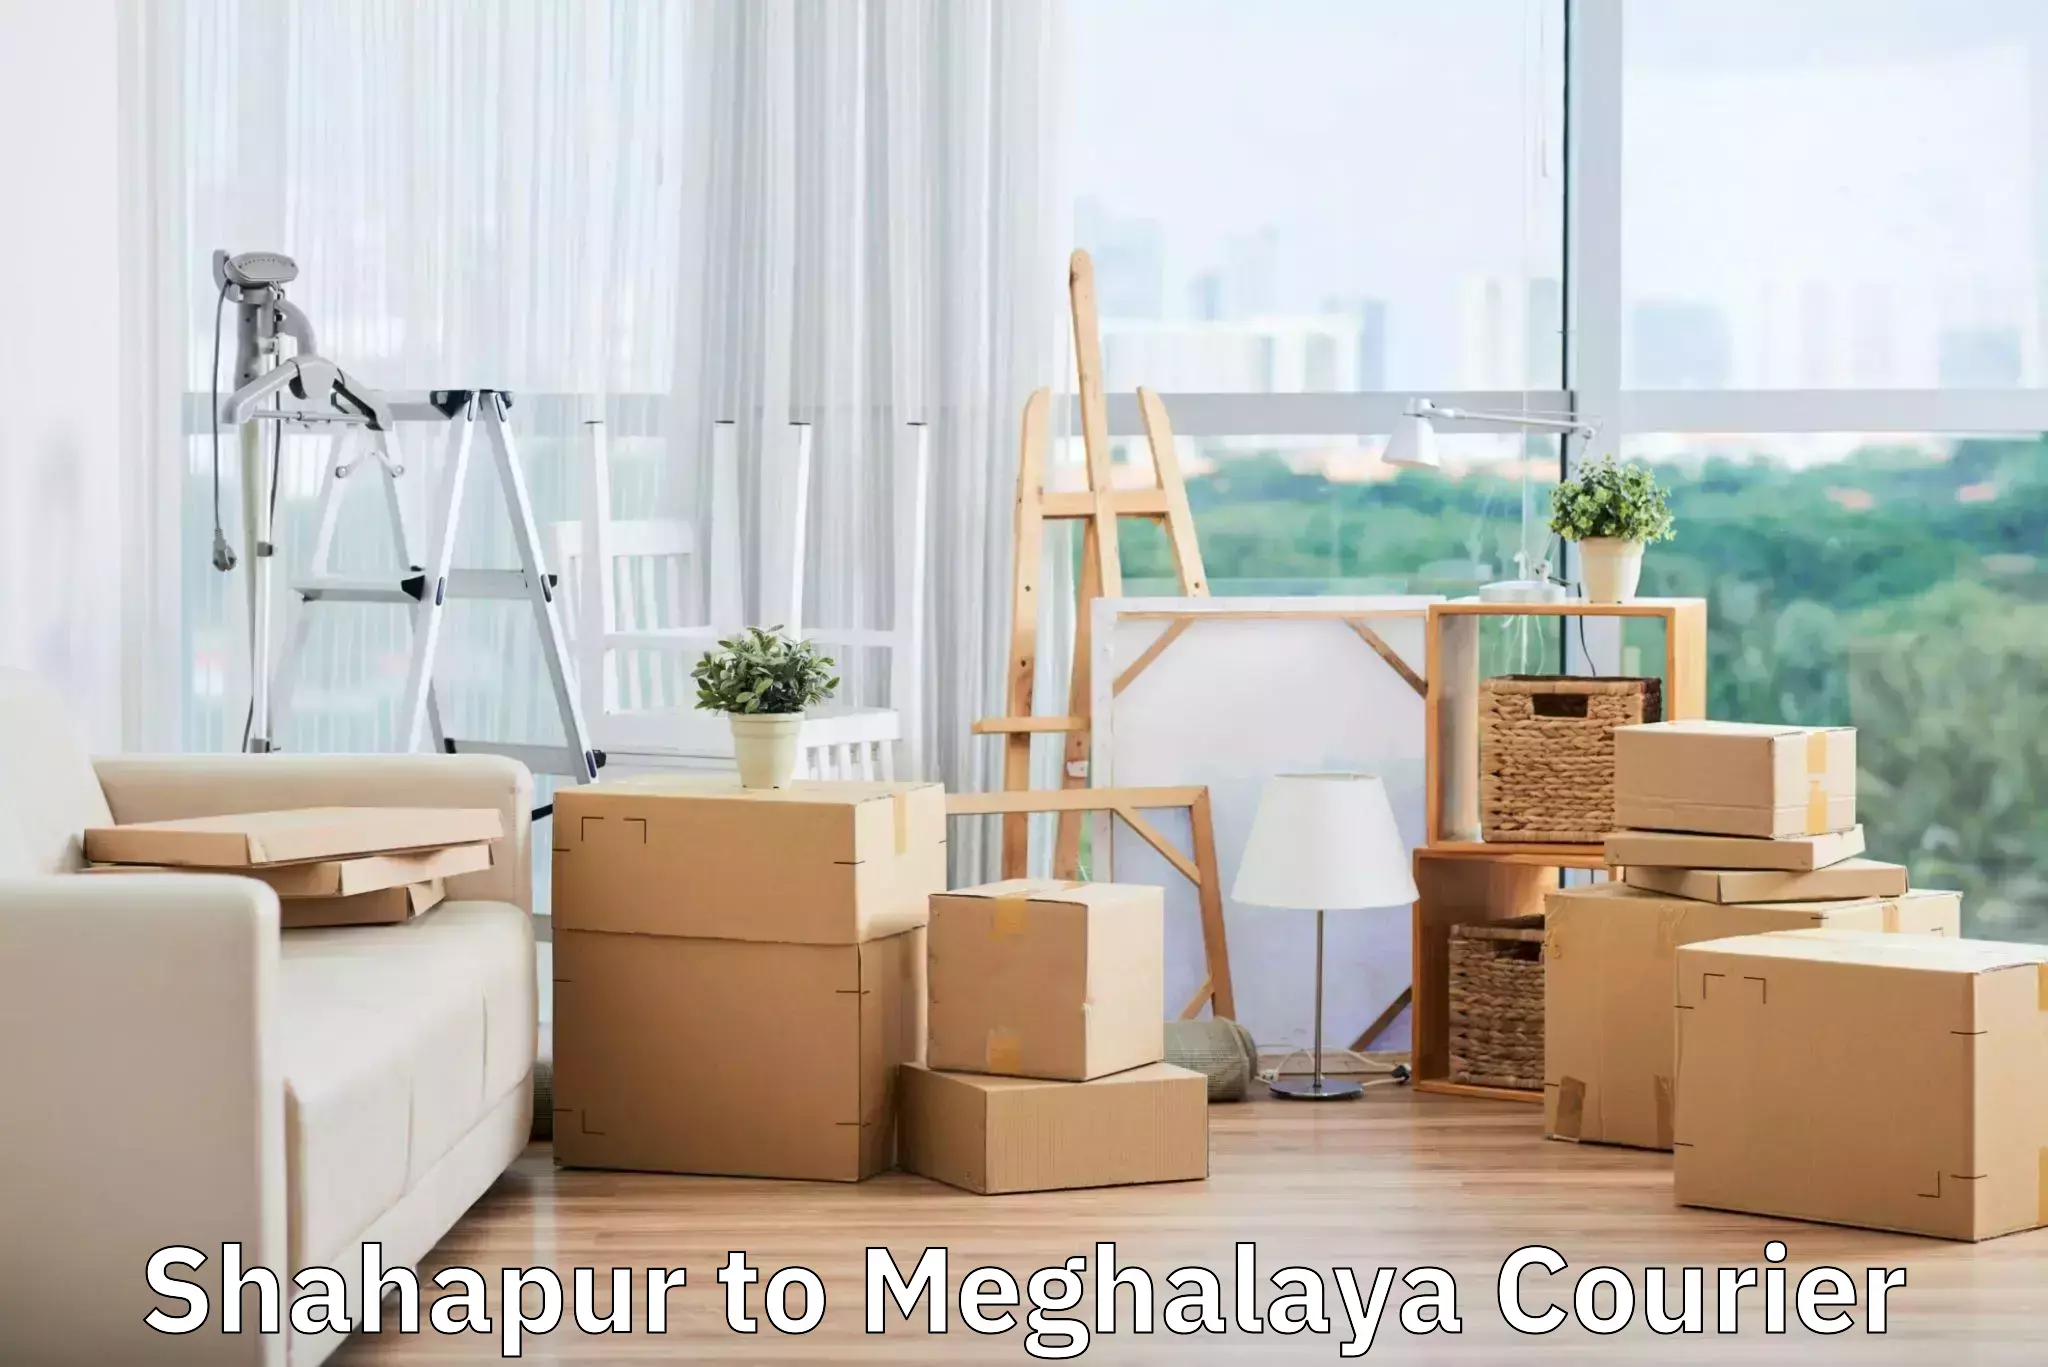 Instant baggage transport quote Shahapur to Meghalaya